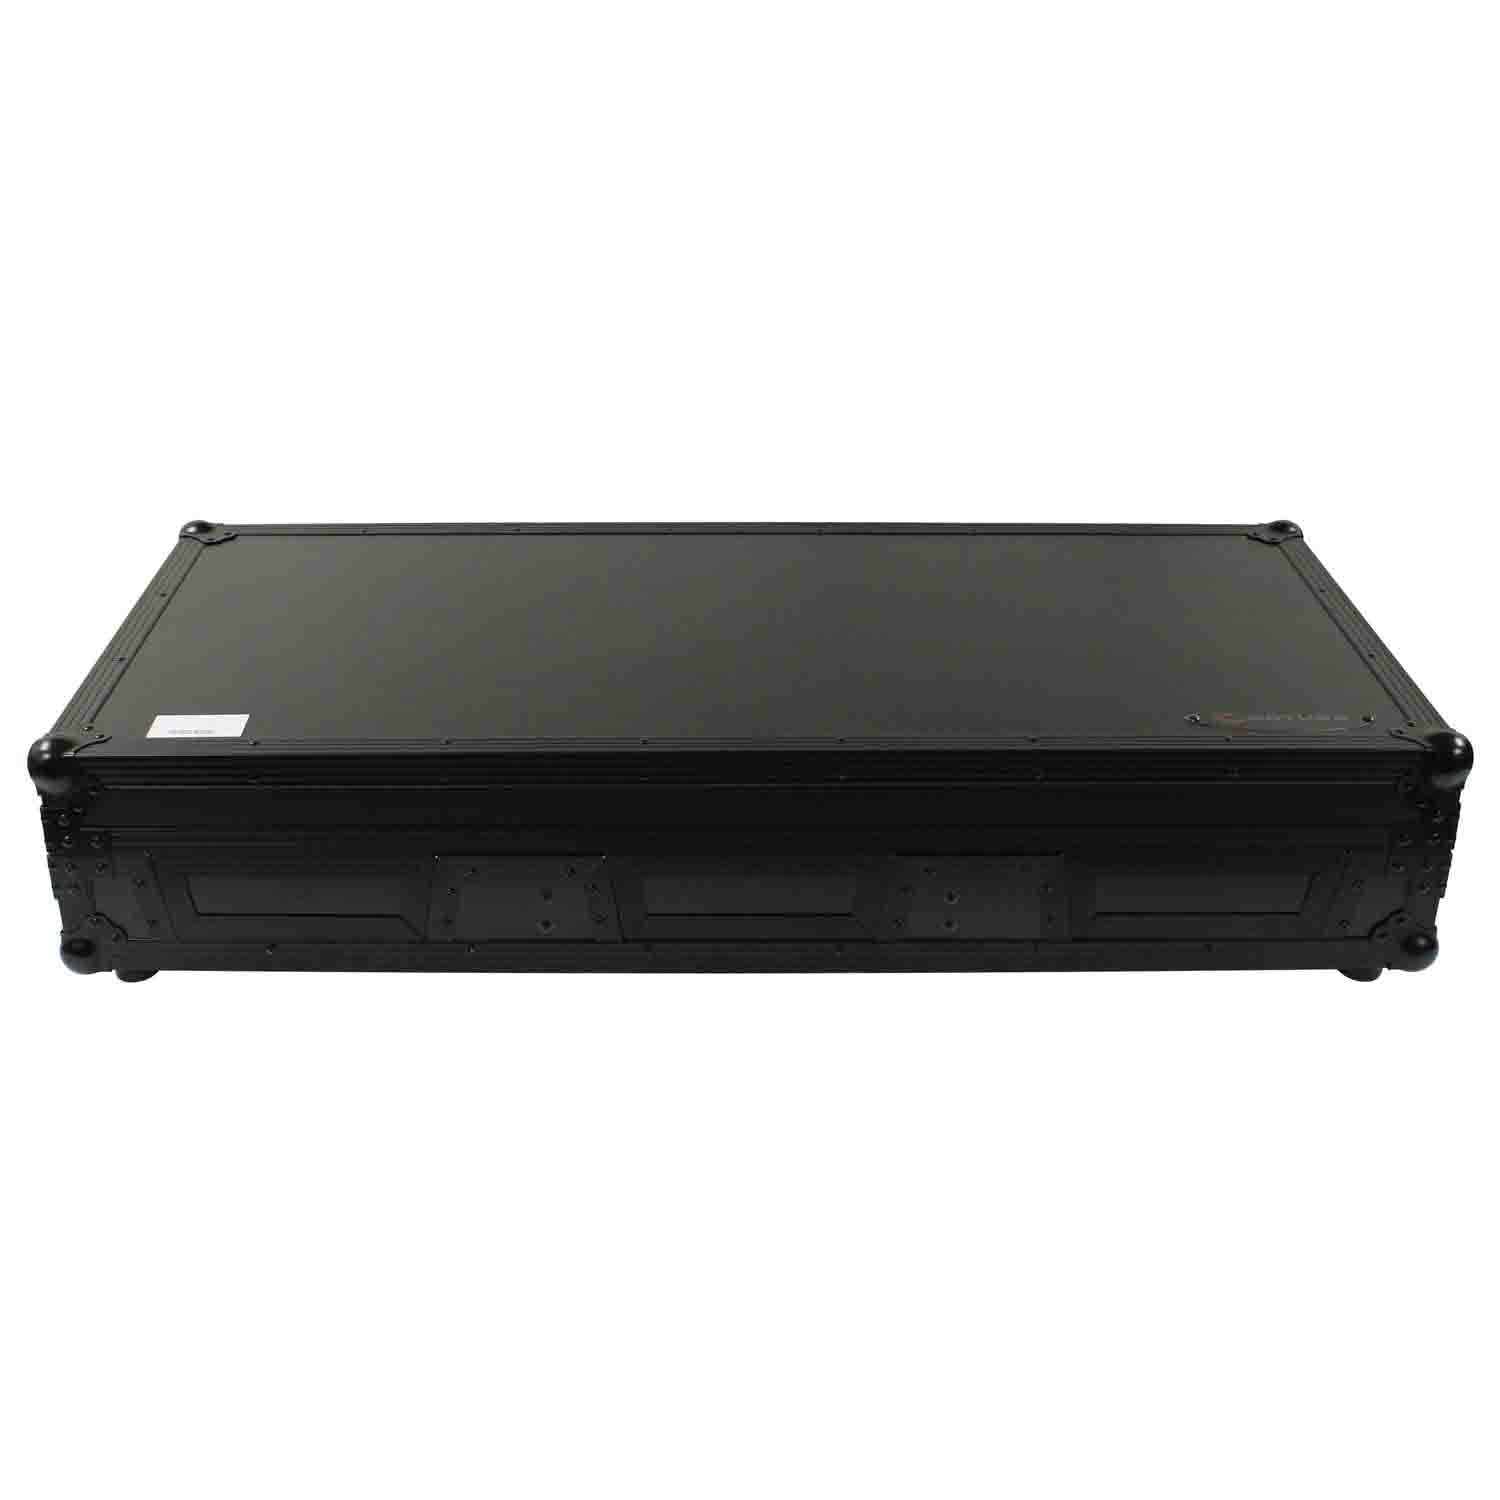 Odyssey FZ12CDJWXD2BL Coffin Flight Case For 12″ Format DJ Mixer and Two Large Format Media Players Odyssey